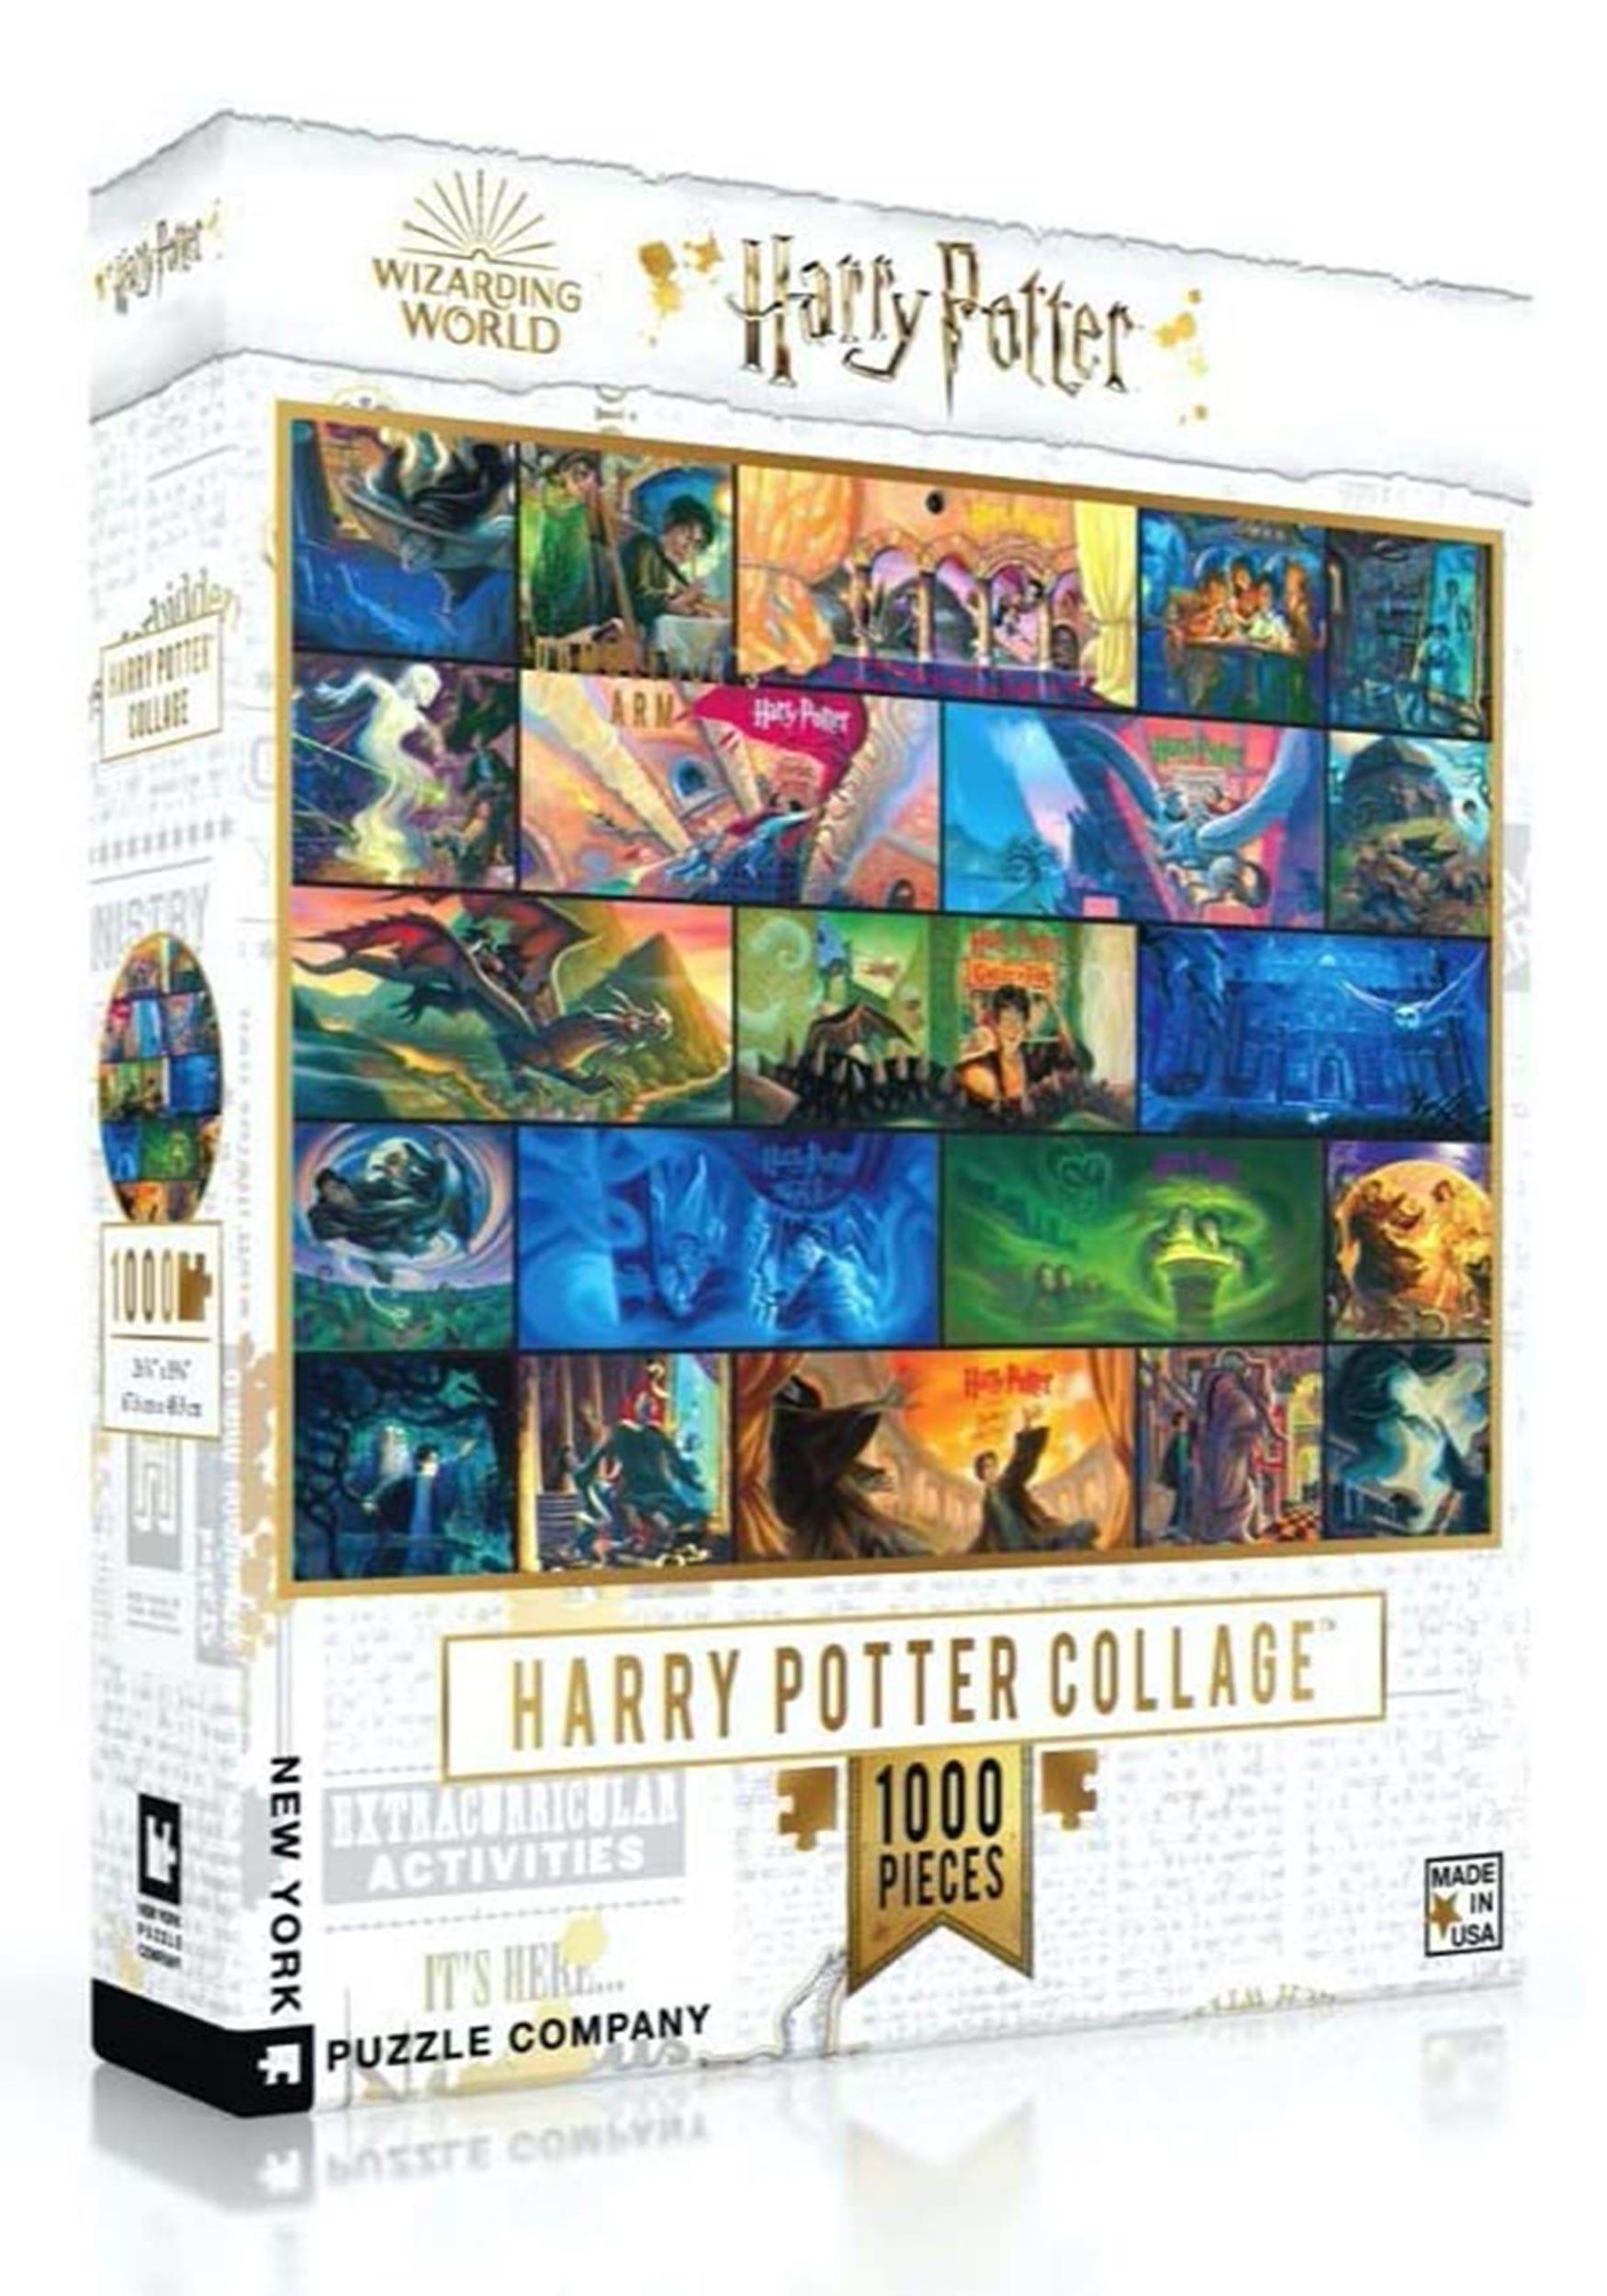 1000 pc Harry Potter Collage Jigsaw Puzzle